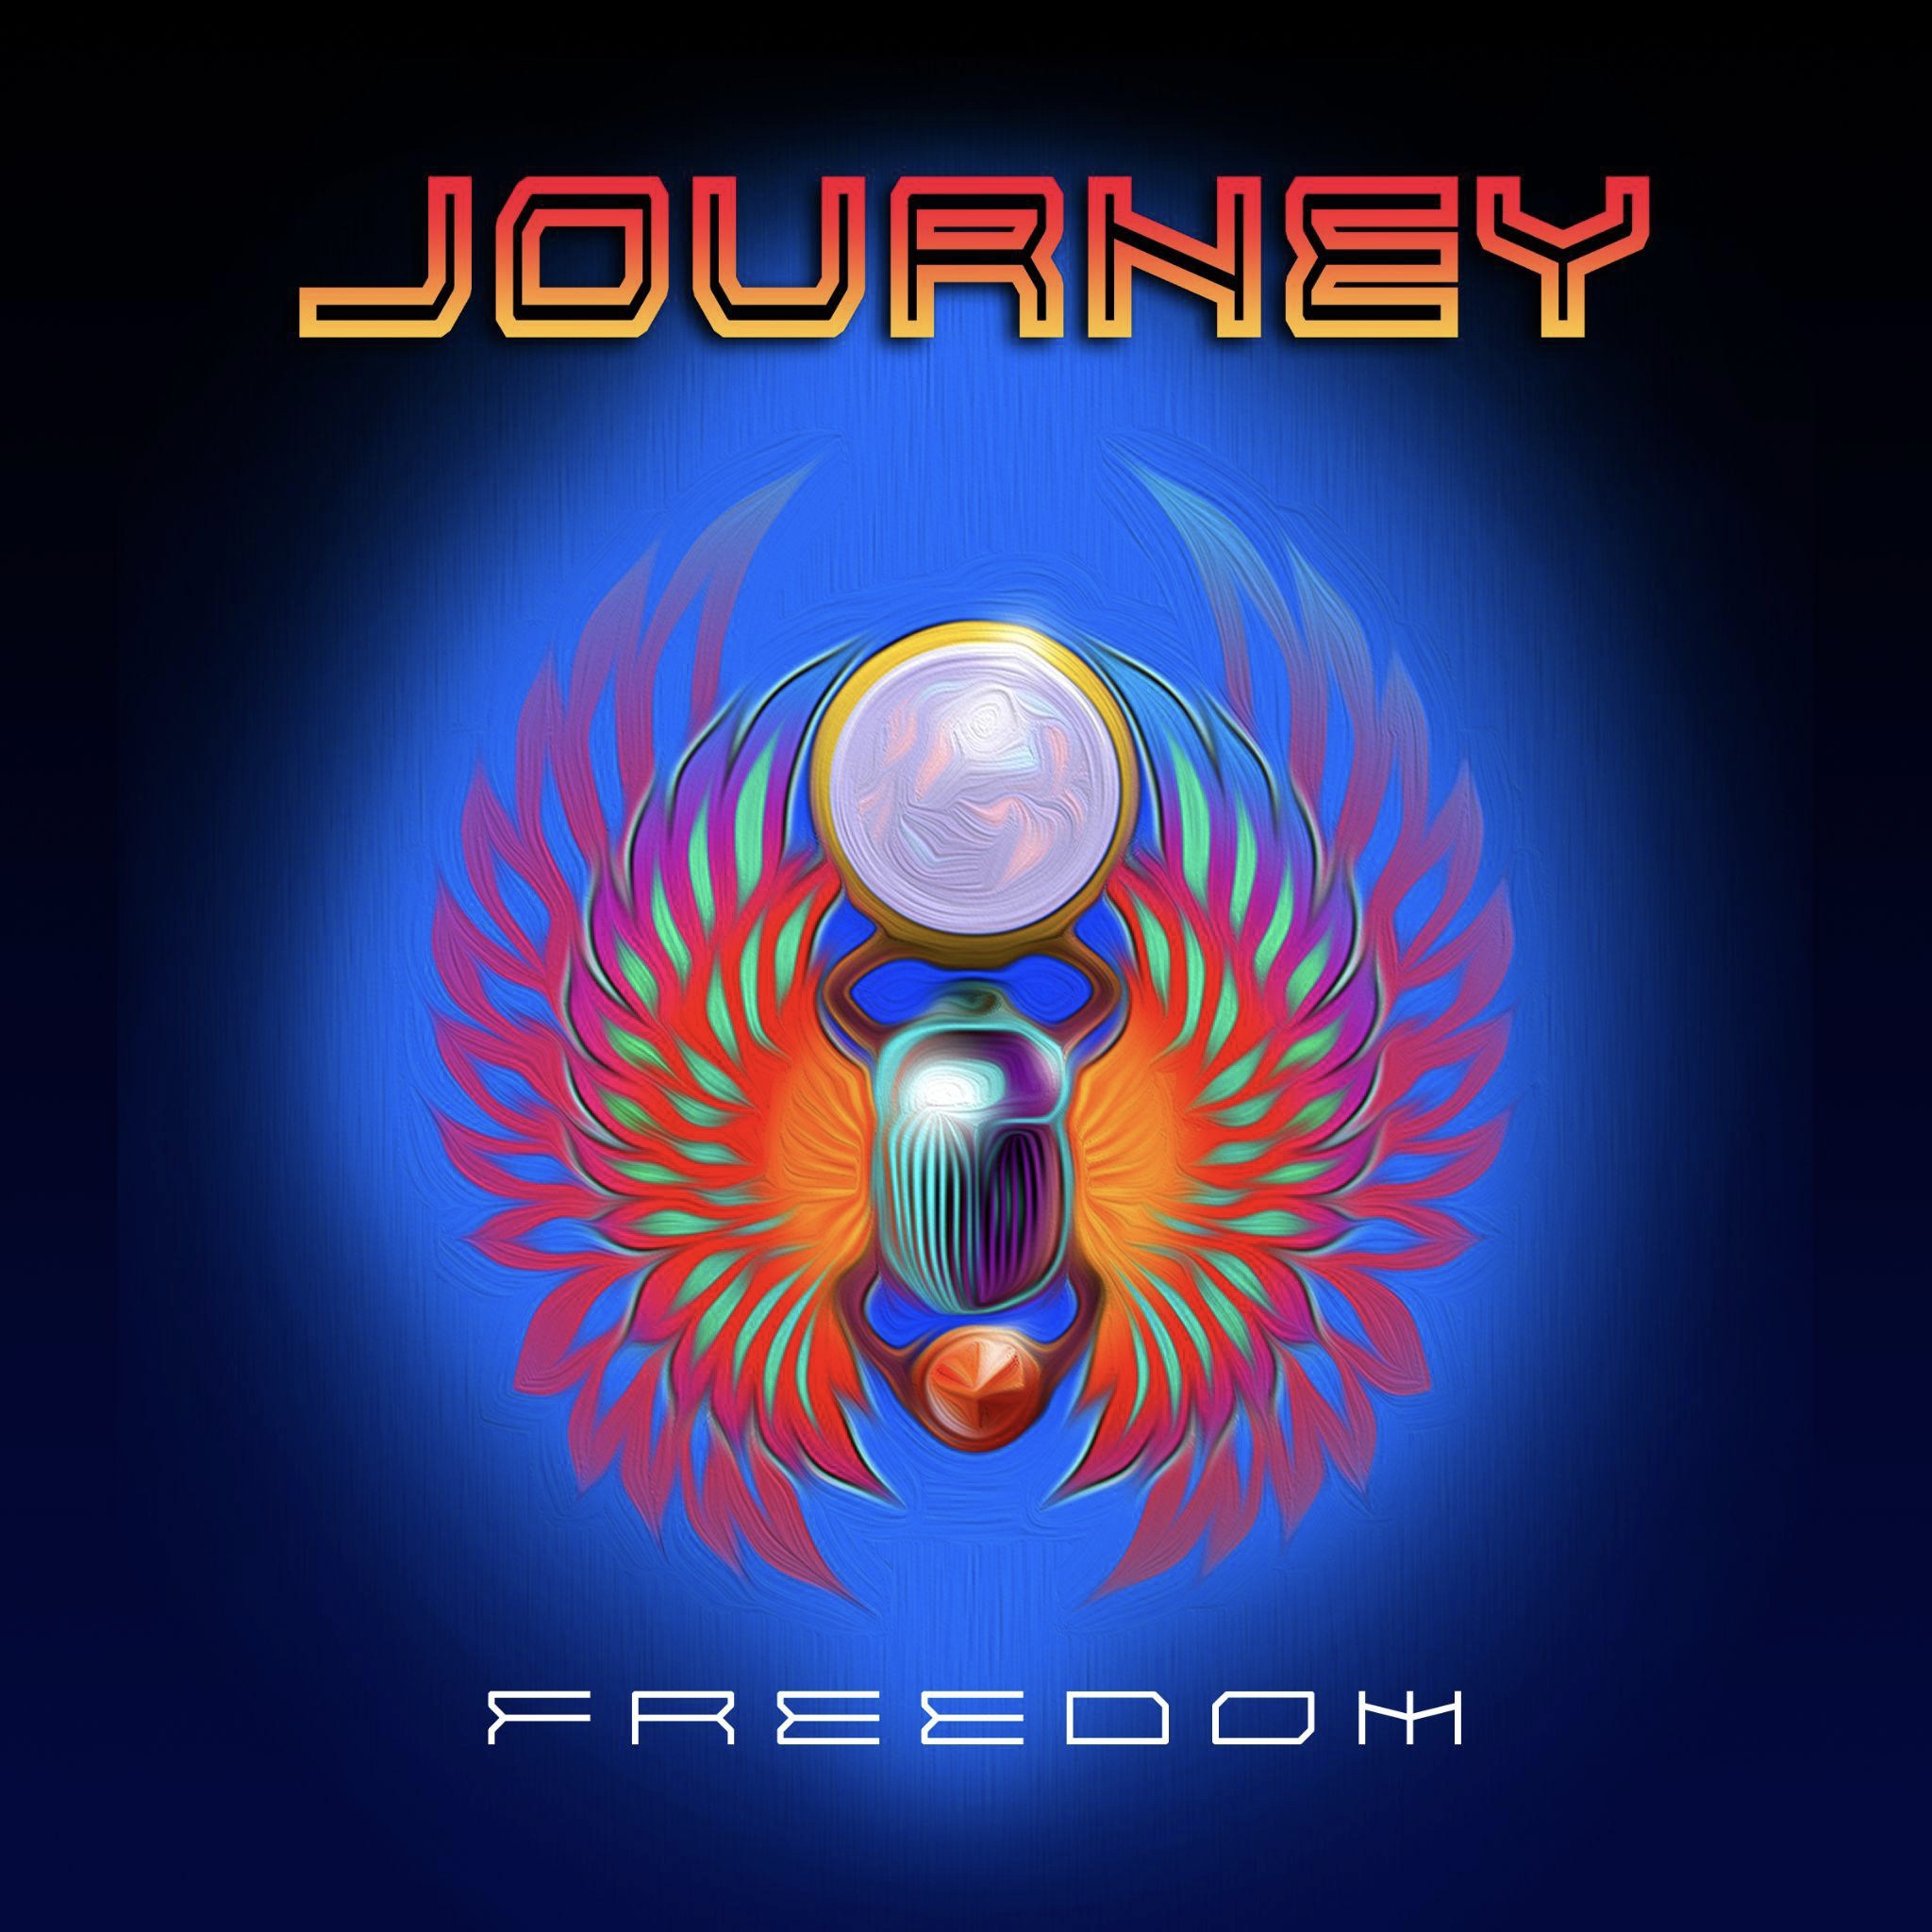 journey cover band paramount